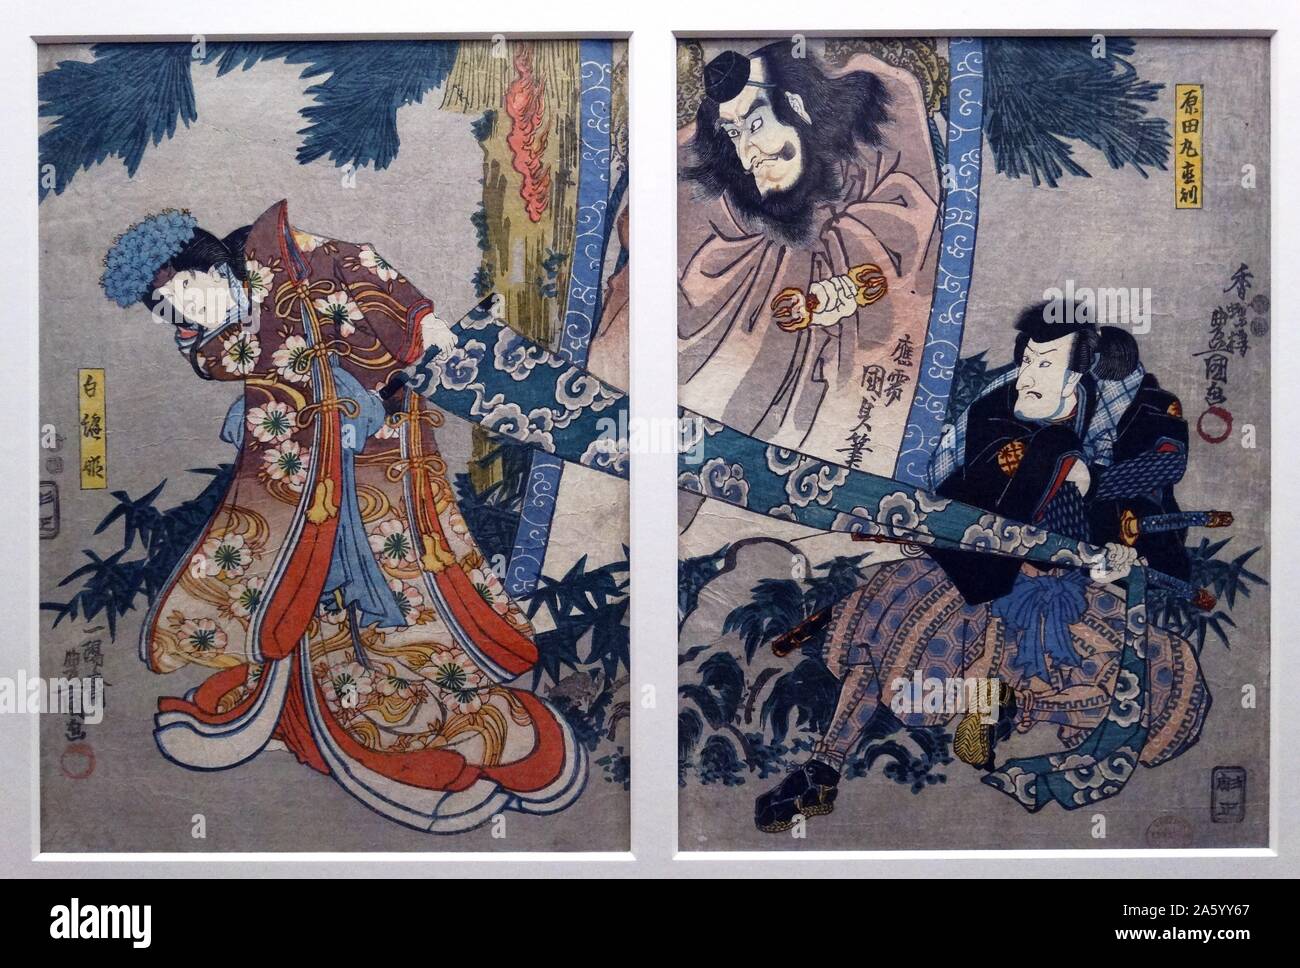 Colour woodblock triptych titled 'A struggle in the Dark' by Utagawa Kuniyoshi (1797-1861) a great master of the Japanese ukiyo-e style of woodblock prints and painting. He was a member of the Utagawa school. Dated 19th Century Stock Photo